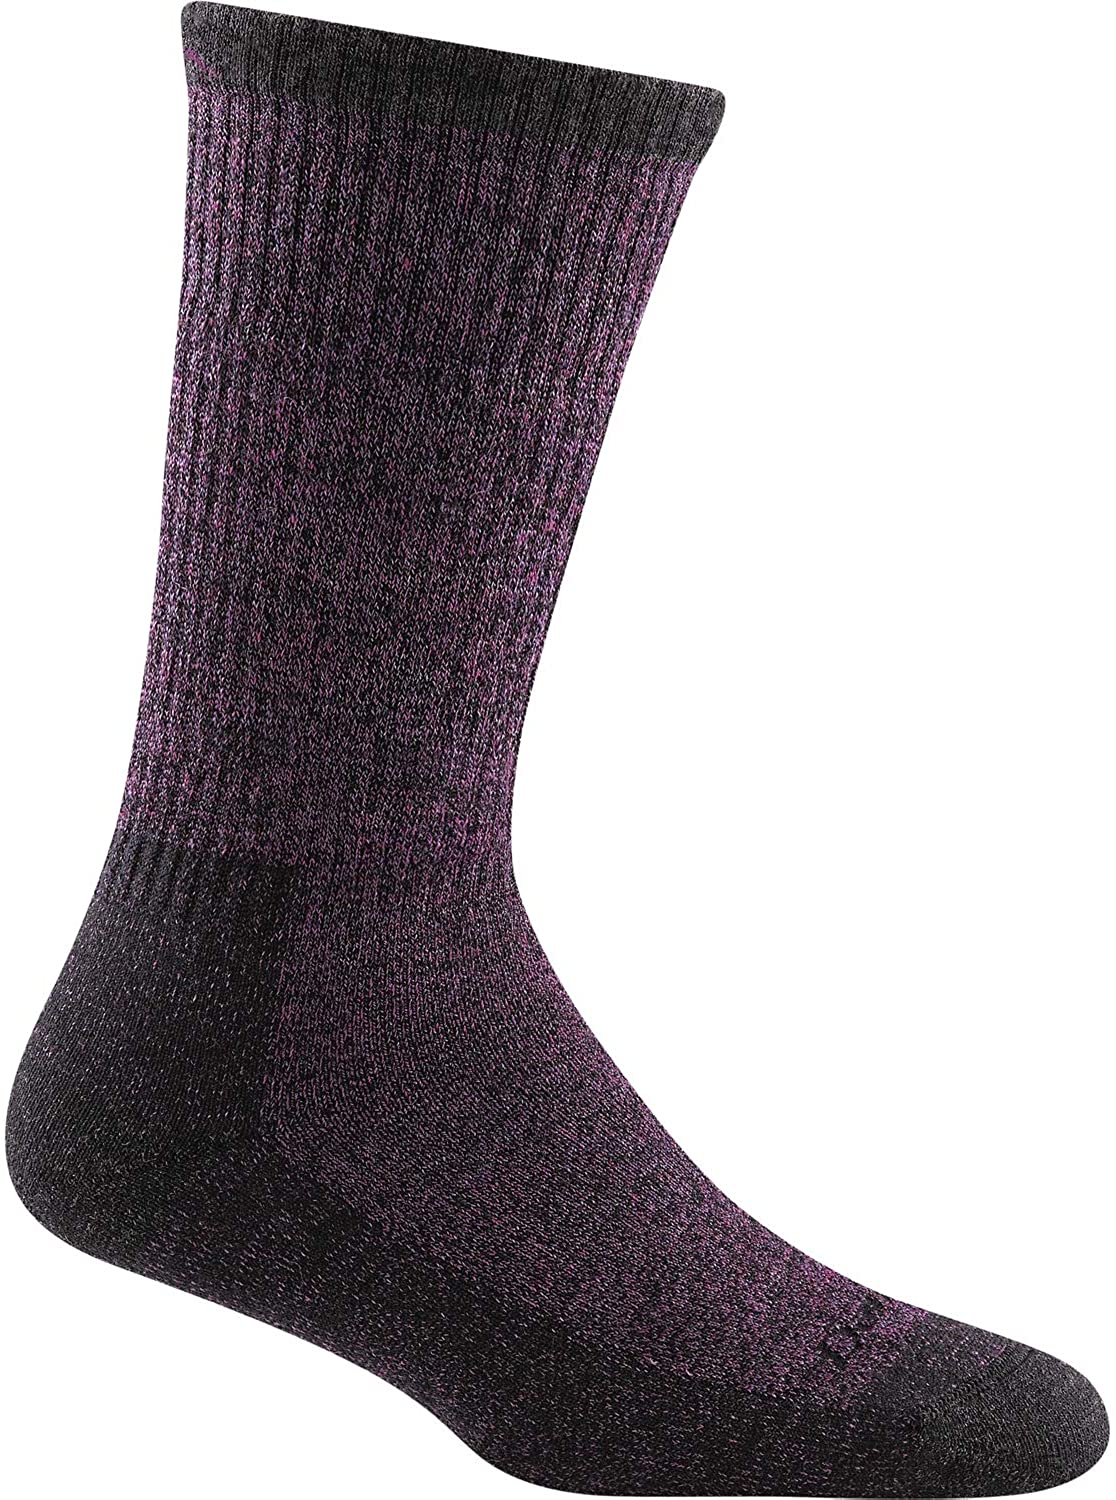 Women's Nomad Boot Midweight With Full Cushion Sock in Plum